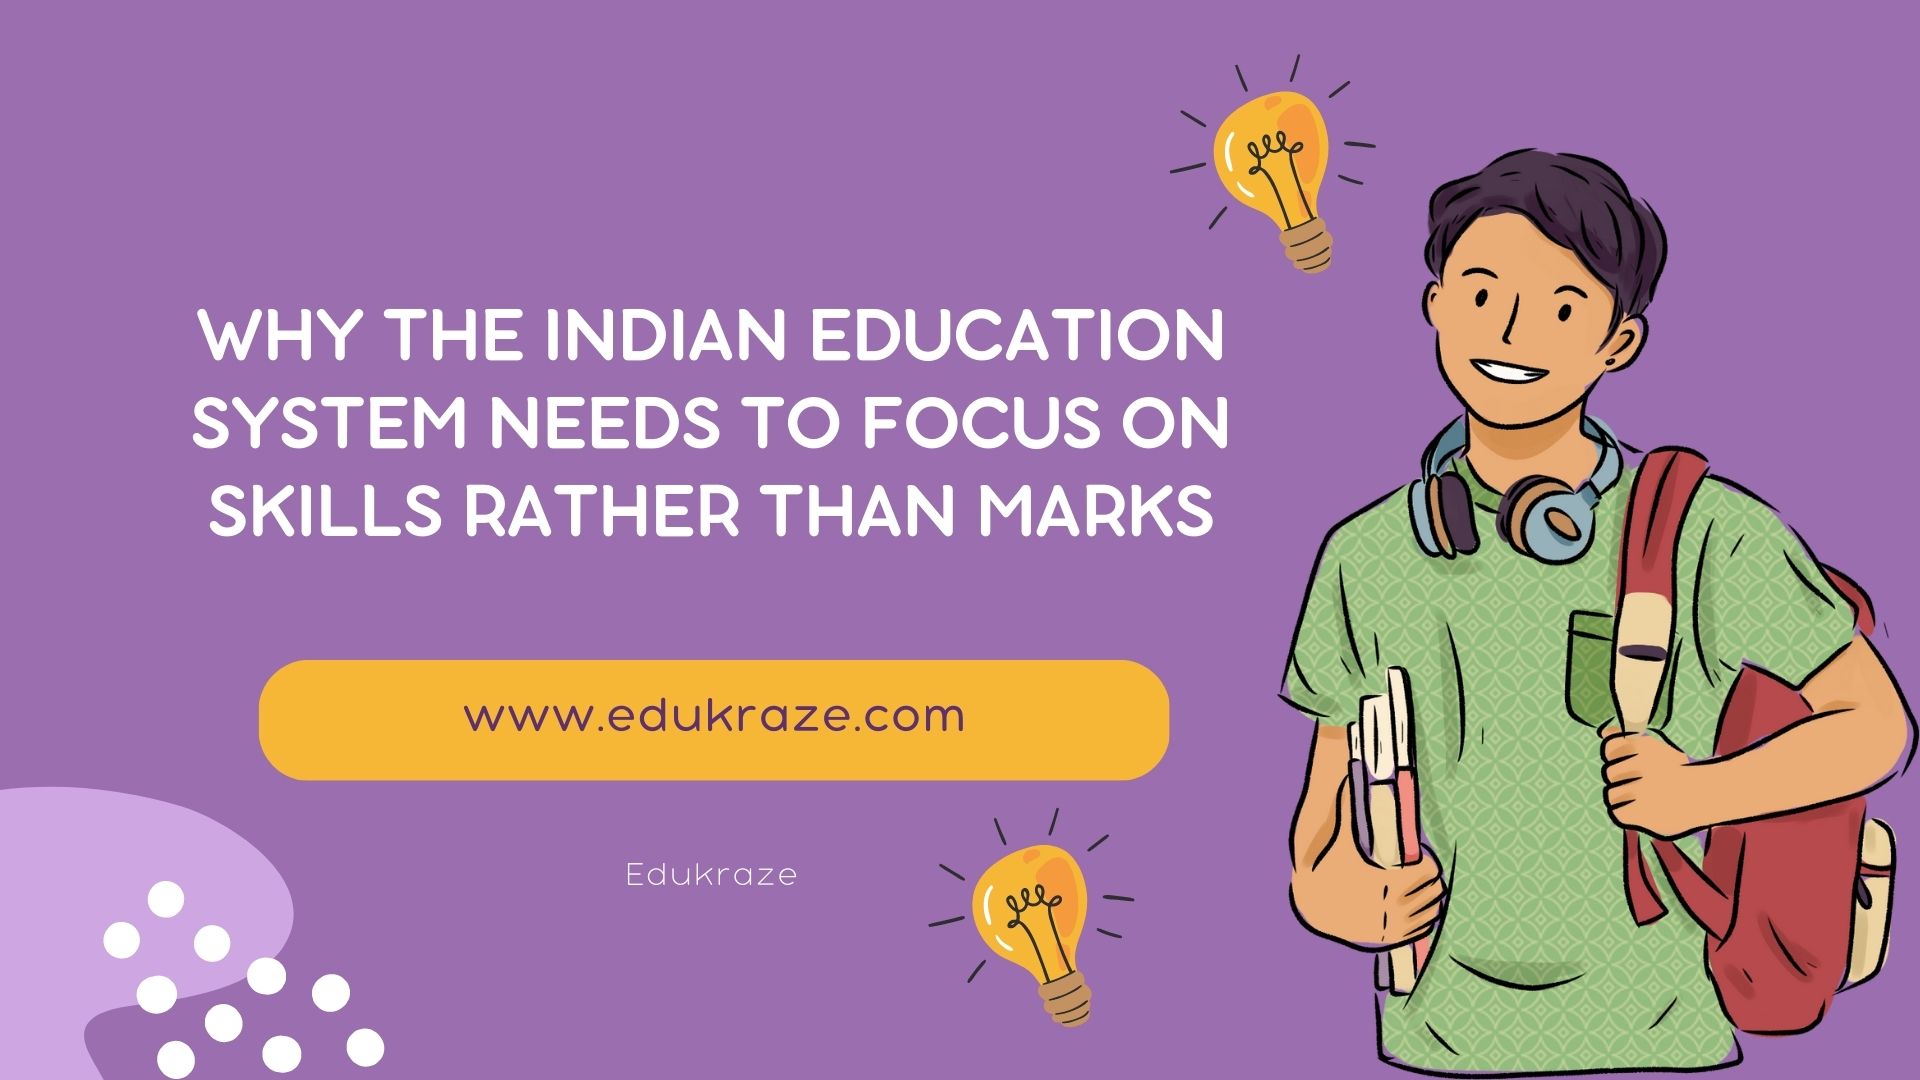 Why the Indian Education System Needs to Focus on Skills Rather Than Marks